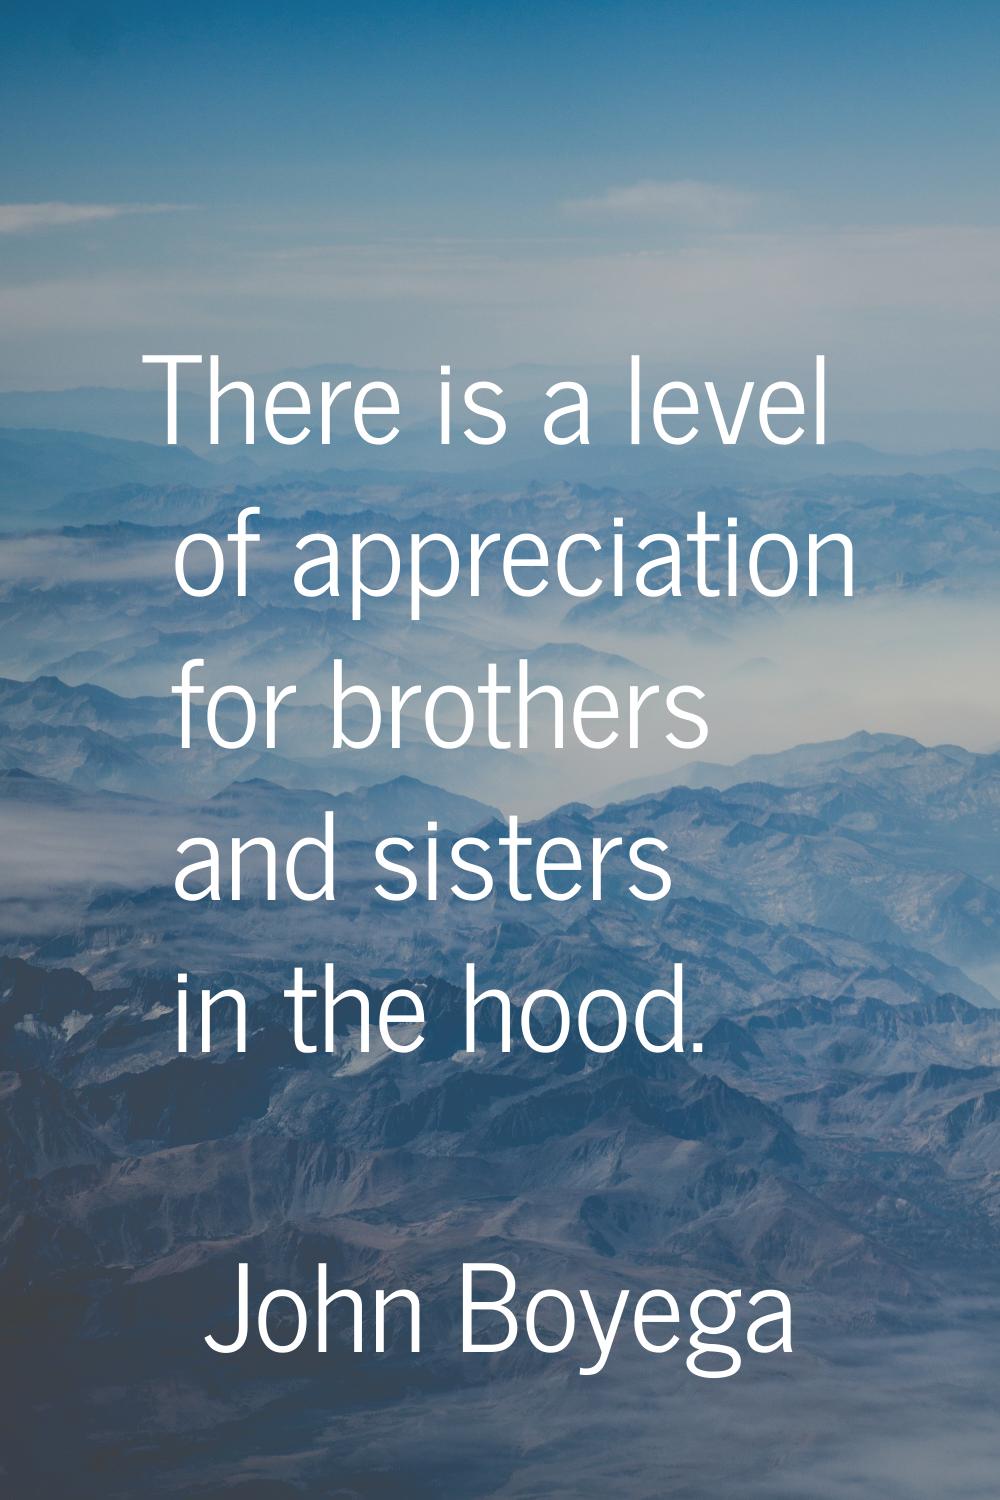 There is a level of appreciation for brothers and sisters in the hood.